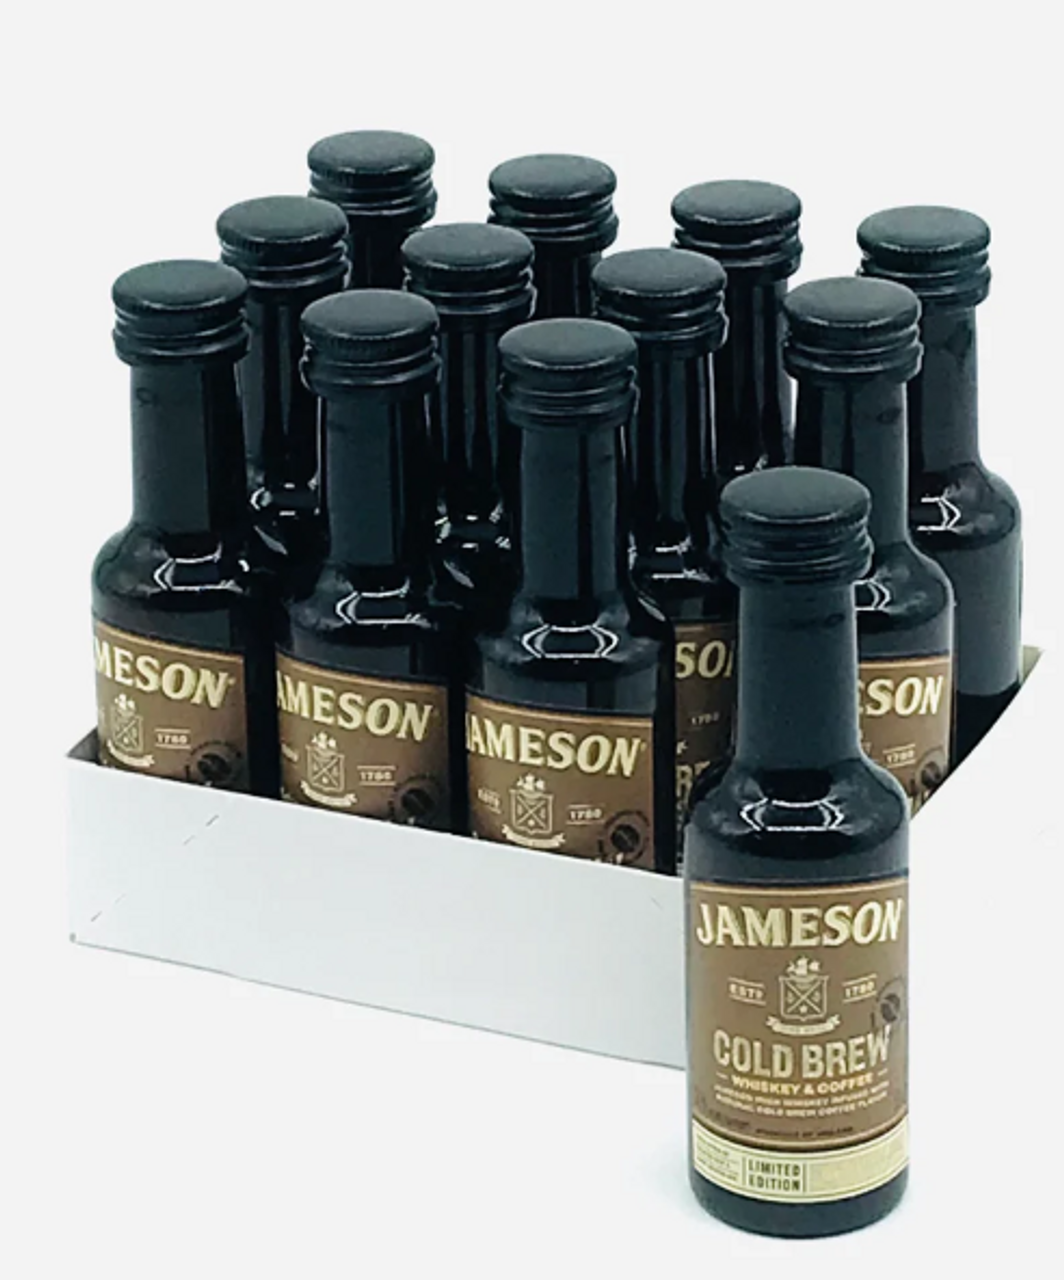 Jameson Cold Brew Whiskey & Coffee Limited Edition - Holiday Wine